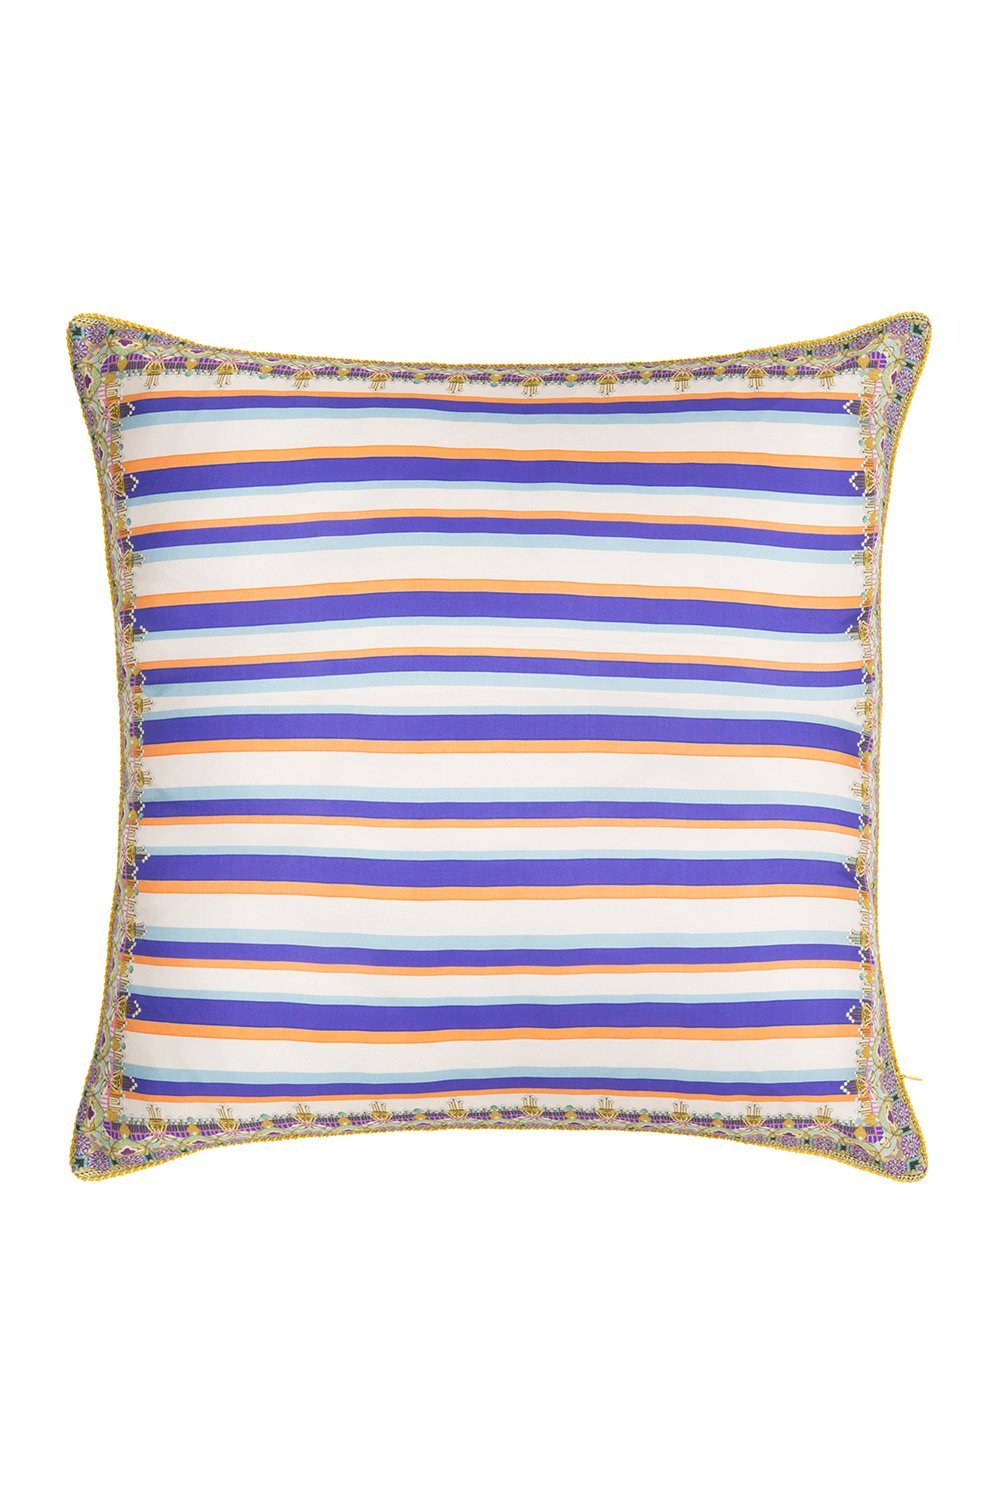 LARGE SQUARE CUSHION MELLOW MUSE